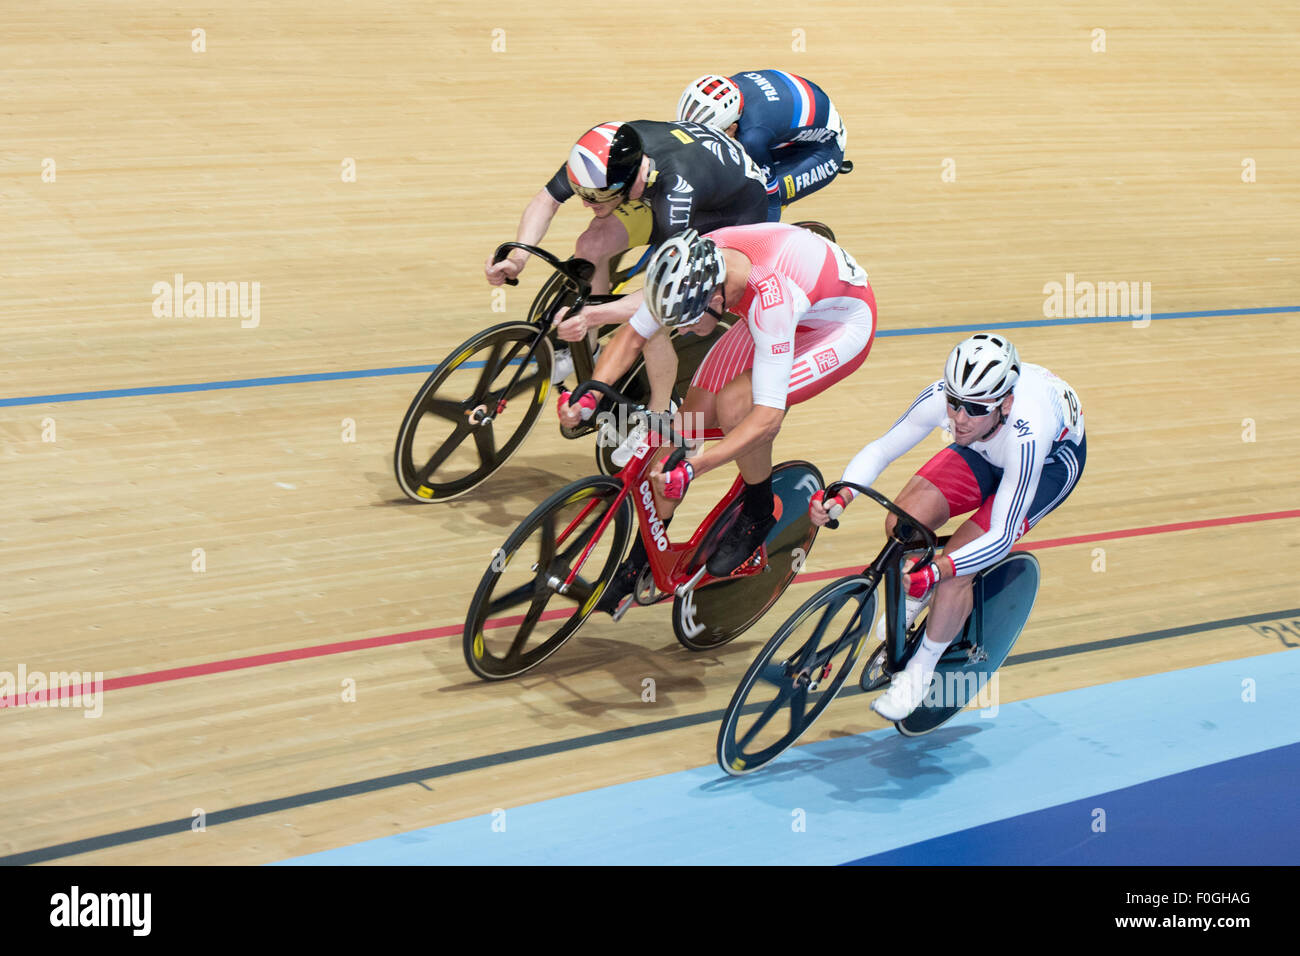 Mark Cavendish (right) sprints against Chris Latham (in red) and Ed Clancy (in black) in the elimination race during the men's omnium at the Revolution Series at Derby Arena, Derby, United Kingdom on 15 August 2015. The Revolution Series is a professional track racing series featuring many of the world's best track cyclists. This event, taking place over 3 days from 14-16 August 2015, is an important preparation event for the Rio 2016 Olympic Games, allowing British riders to score qualifying points for the Games. Stock Photo